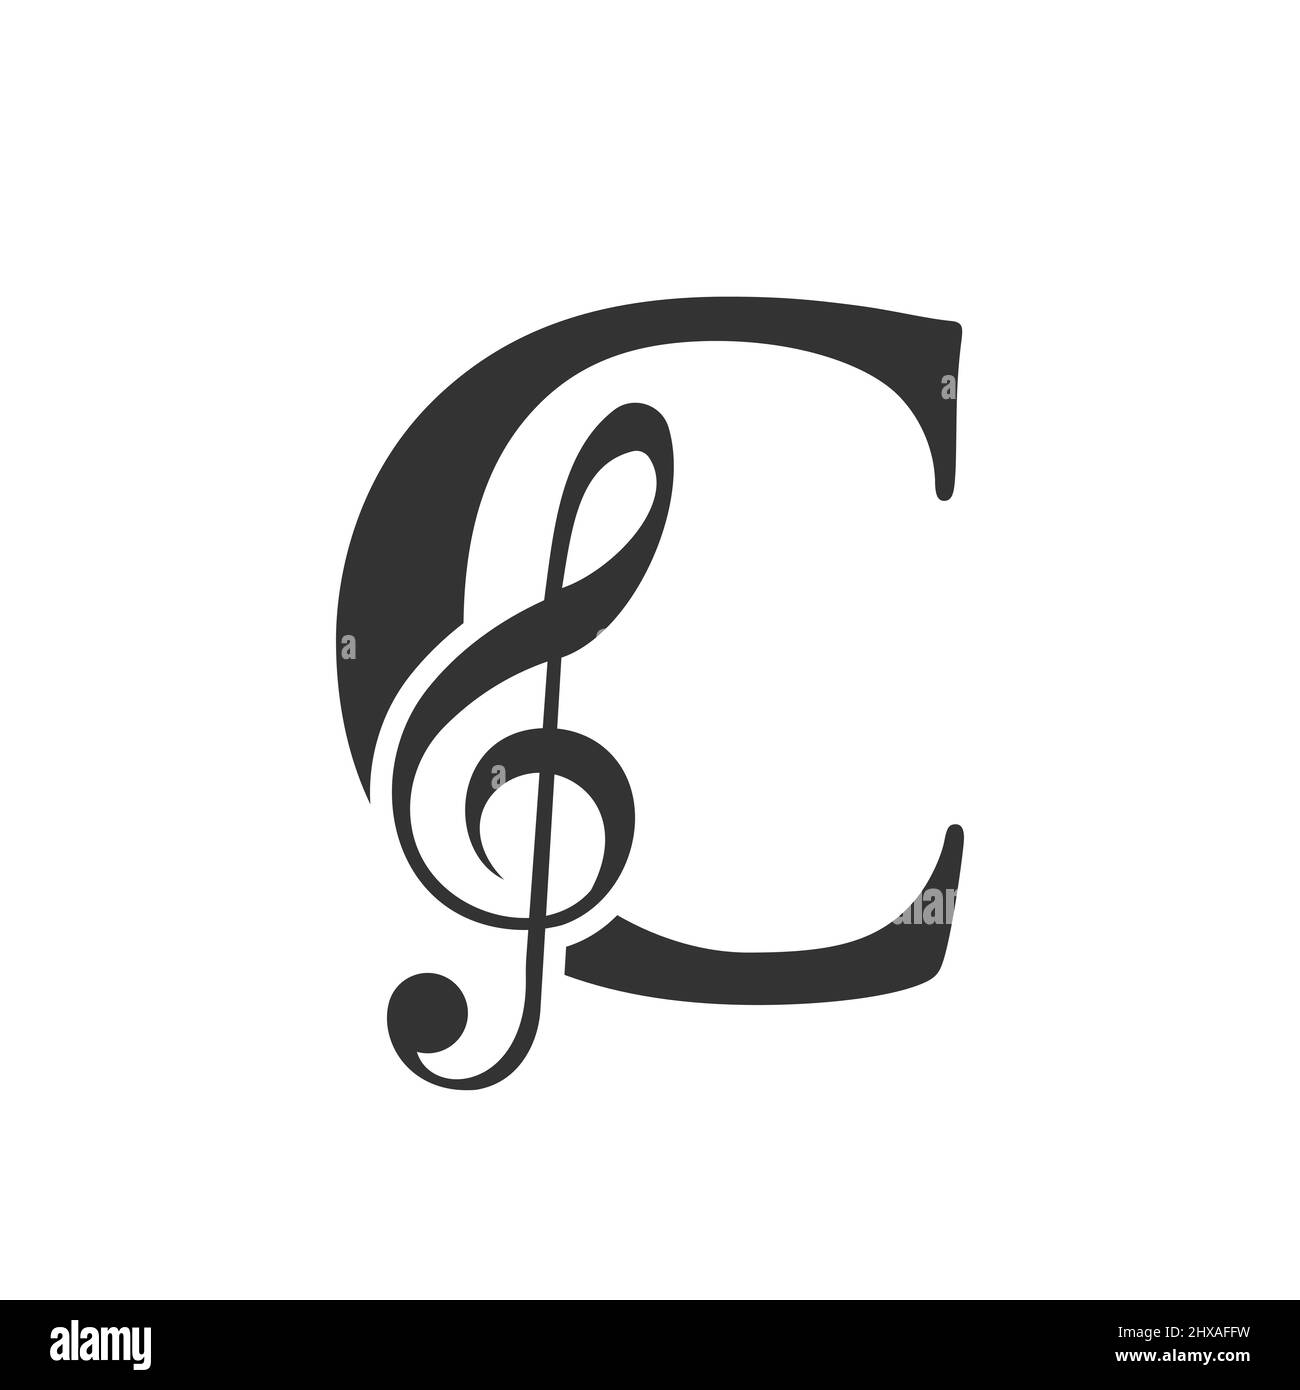 Music Logo On Letter C Concept. C Music Note Sign, Sound Music Melody Template Stock Vector